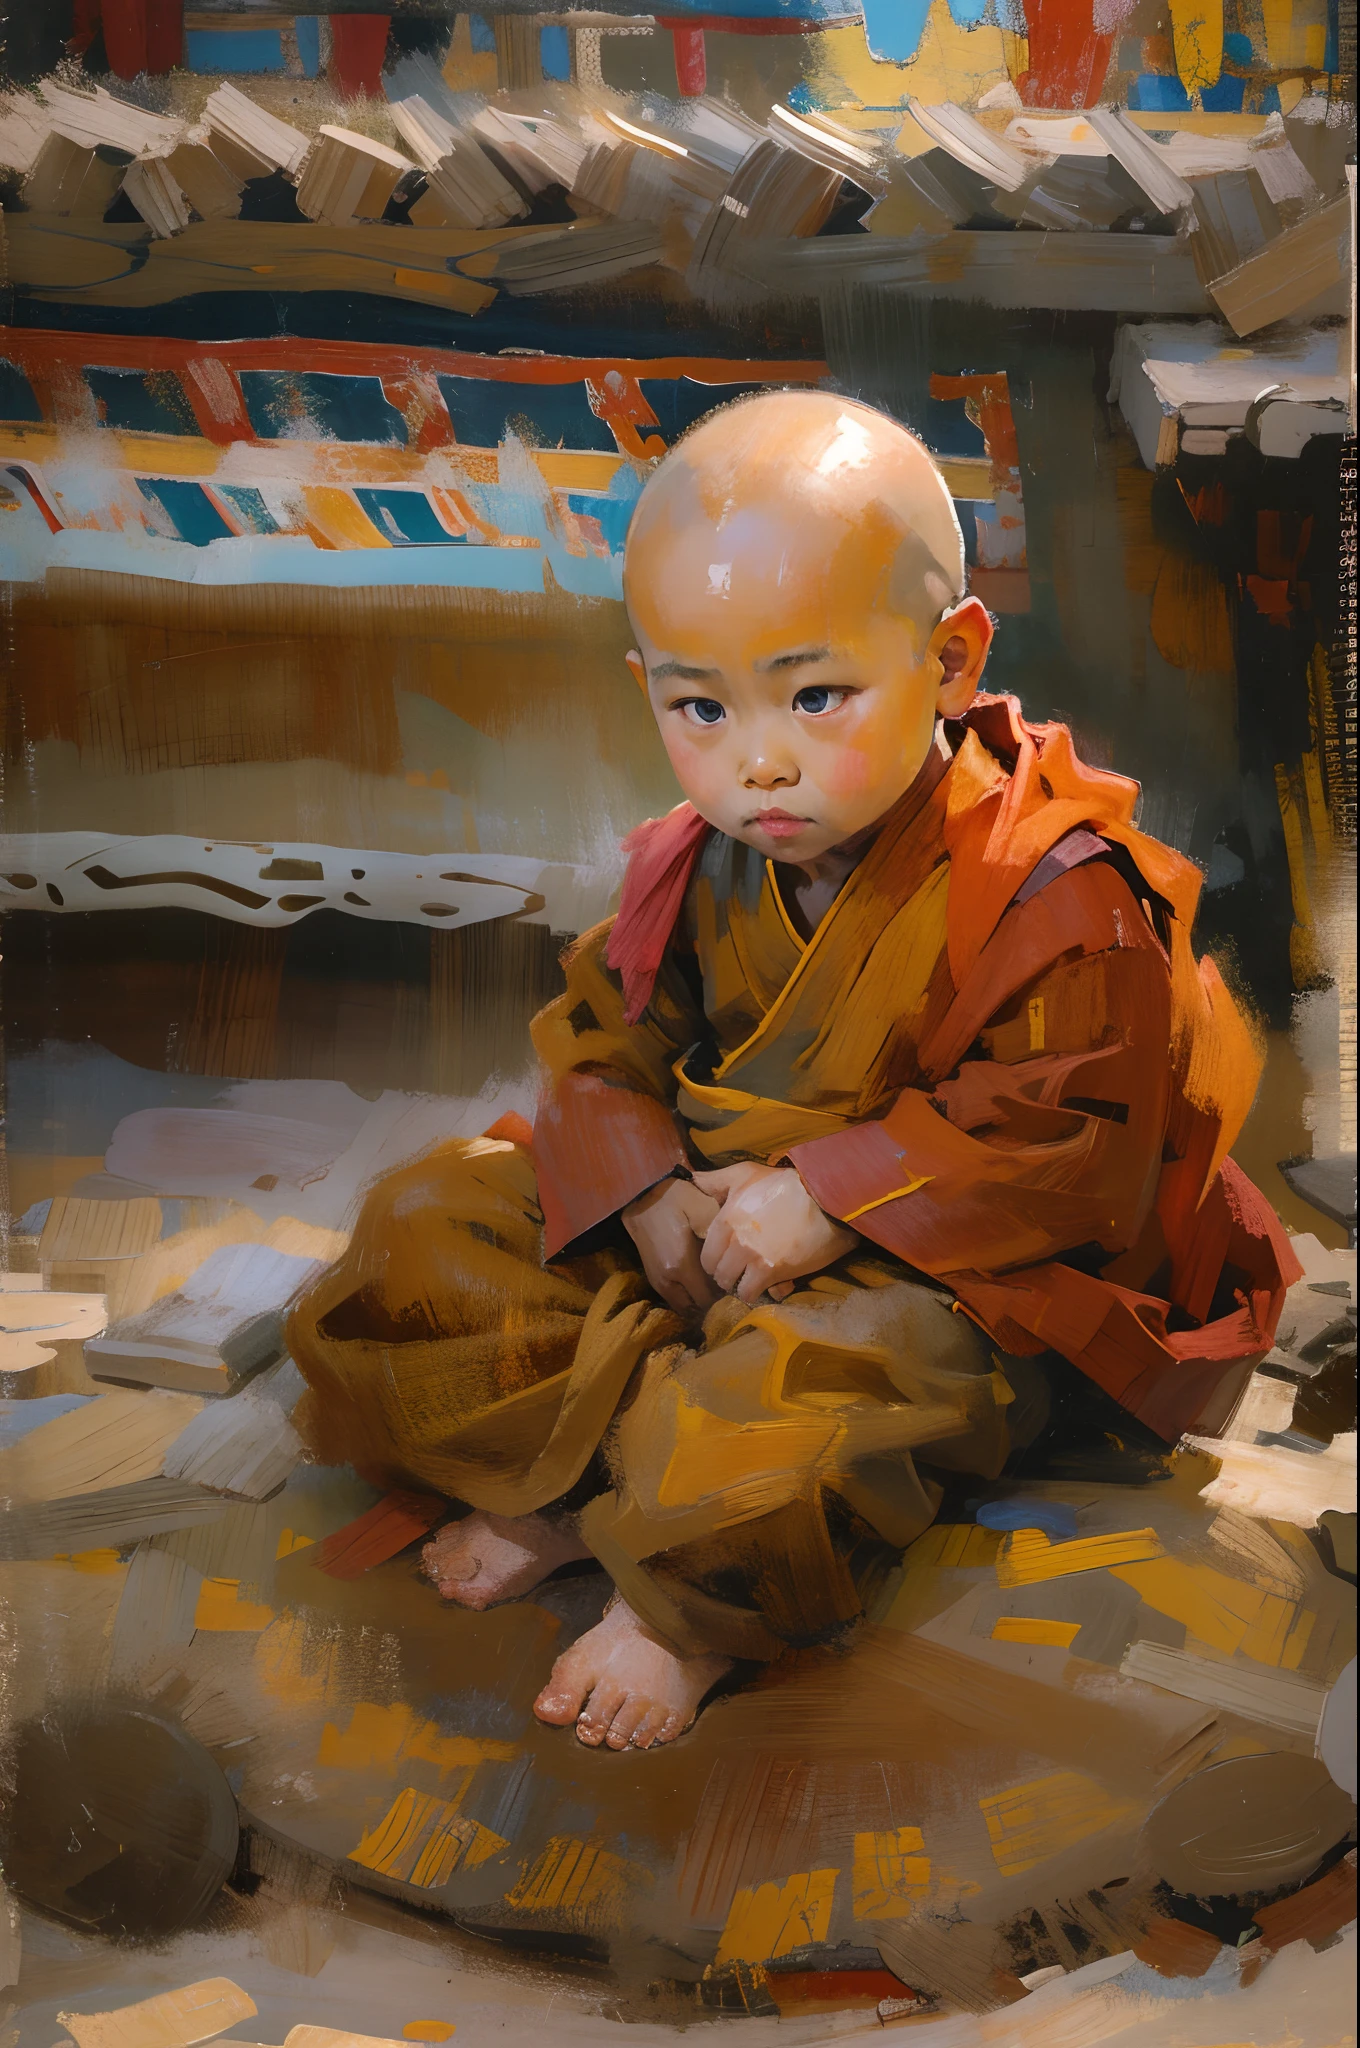 Shigatse, Tibet，Cute cute and serious baby boy living Buddha，Tibetan Buddhist monk clothing，bald-headed，Buddha，Sit cross-kneeled，Red face，and the sun was shining brightly，oil painted，inks，acrycle painting，tmasterpiece，Renaissance style，best qualtiy，A high resolution，super-fine，Eyes detailed，Face detailed，hair detail，Accurate，Clear eye focus close-up